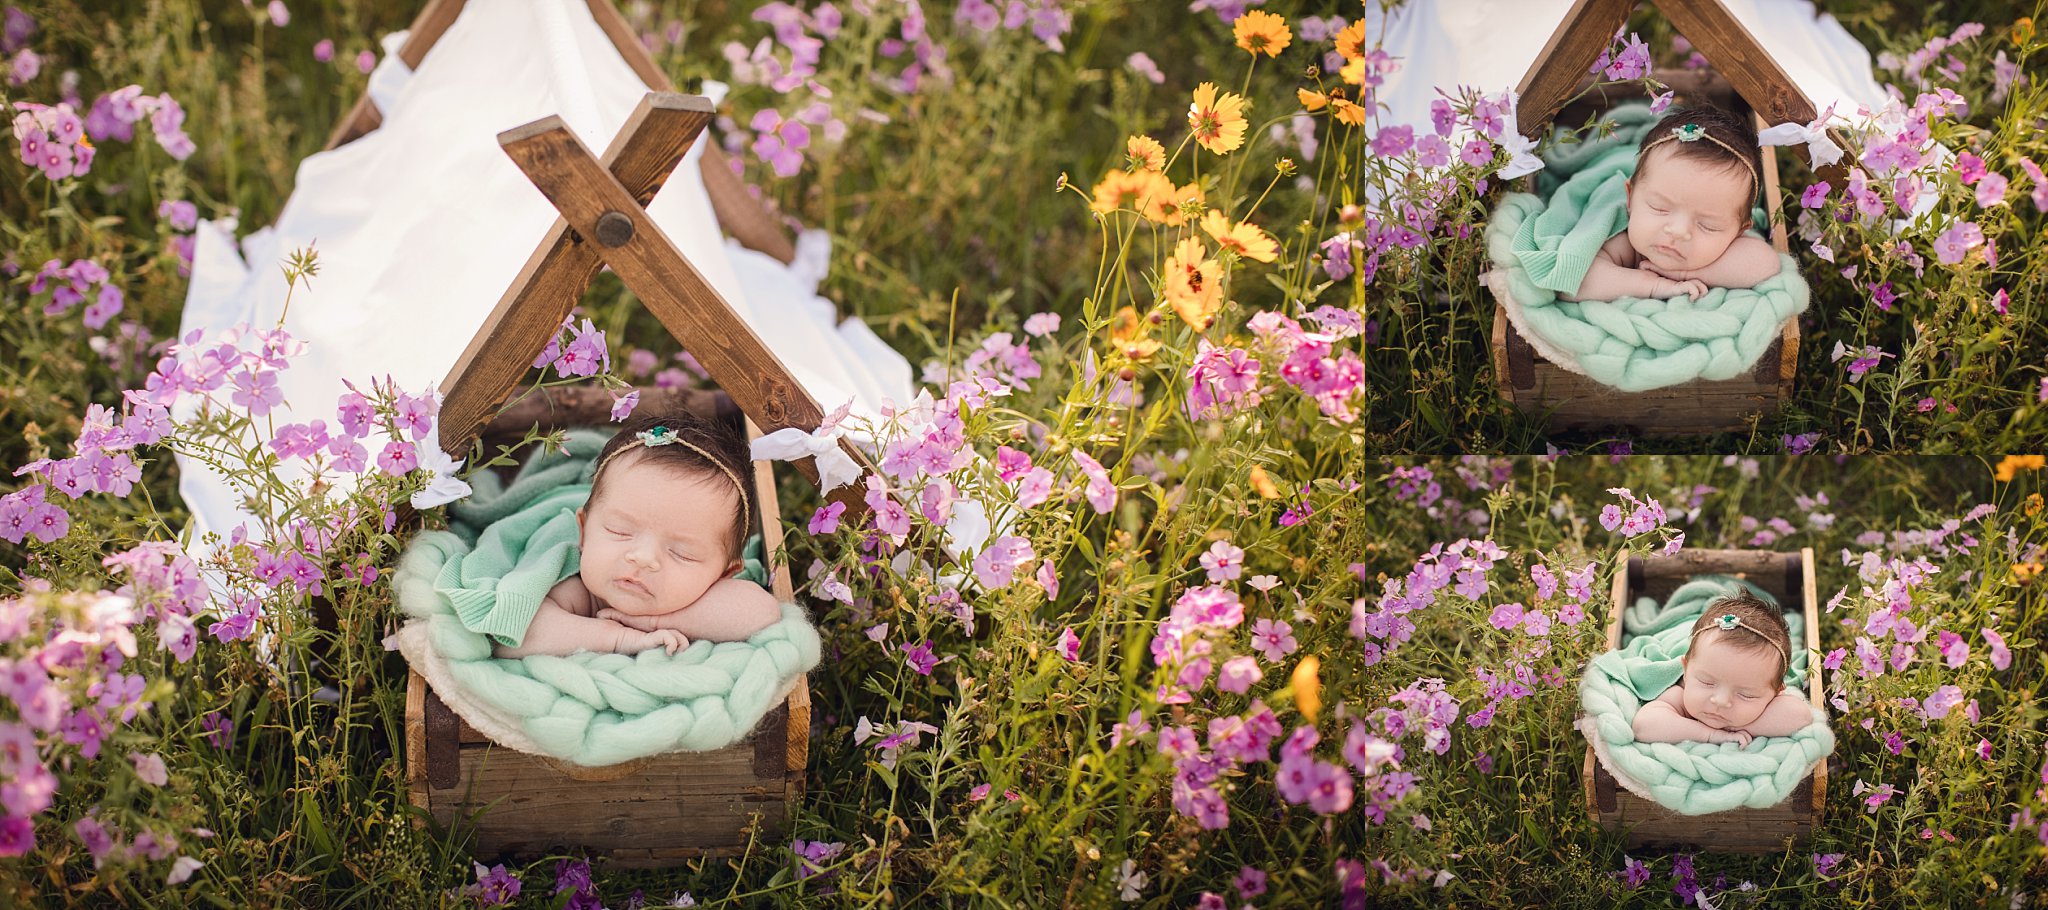 Outdoor Newborn Photographer Jacksonville Fl baby sleeping field of yellow and purple flowers rustic crate mint blanket and headband white teepee